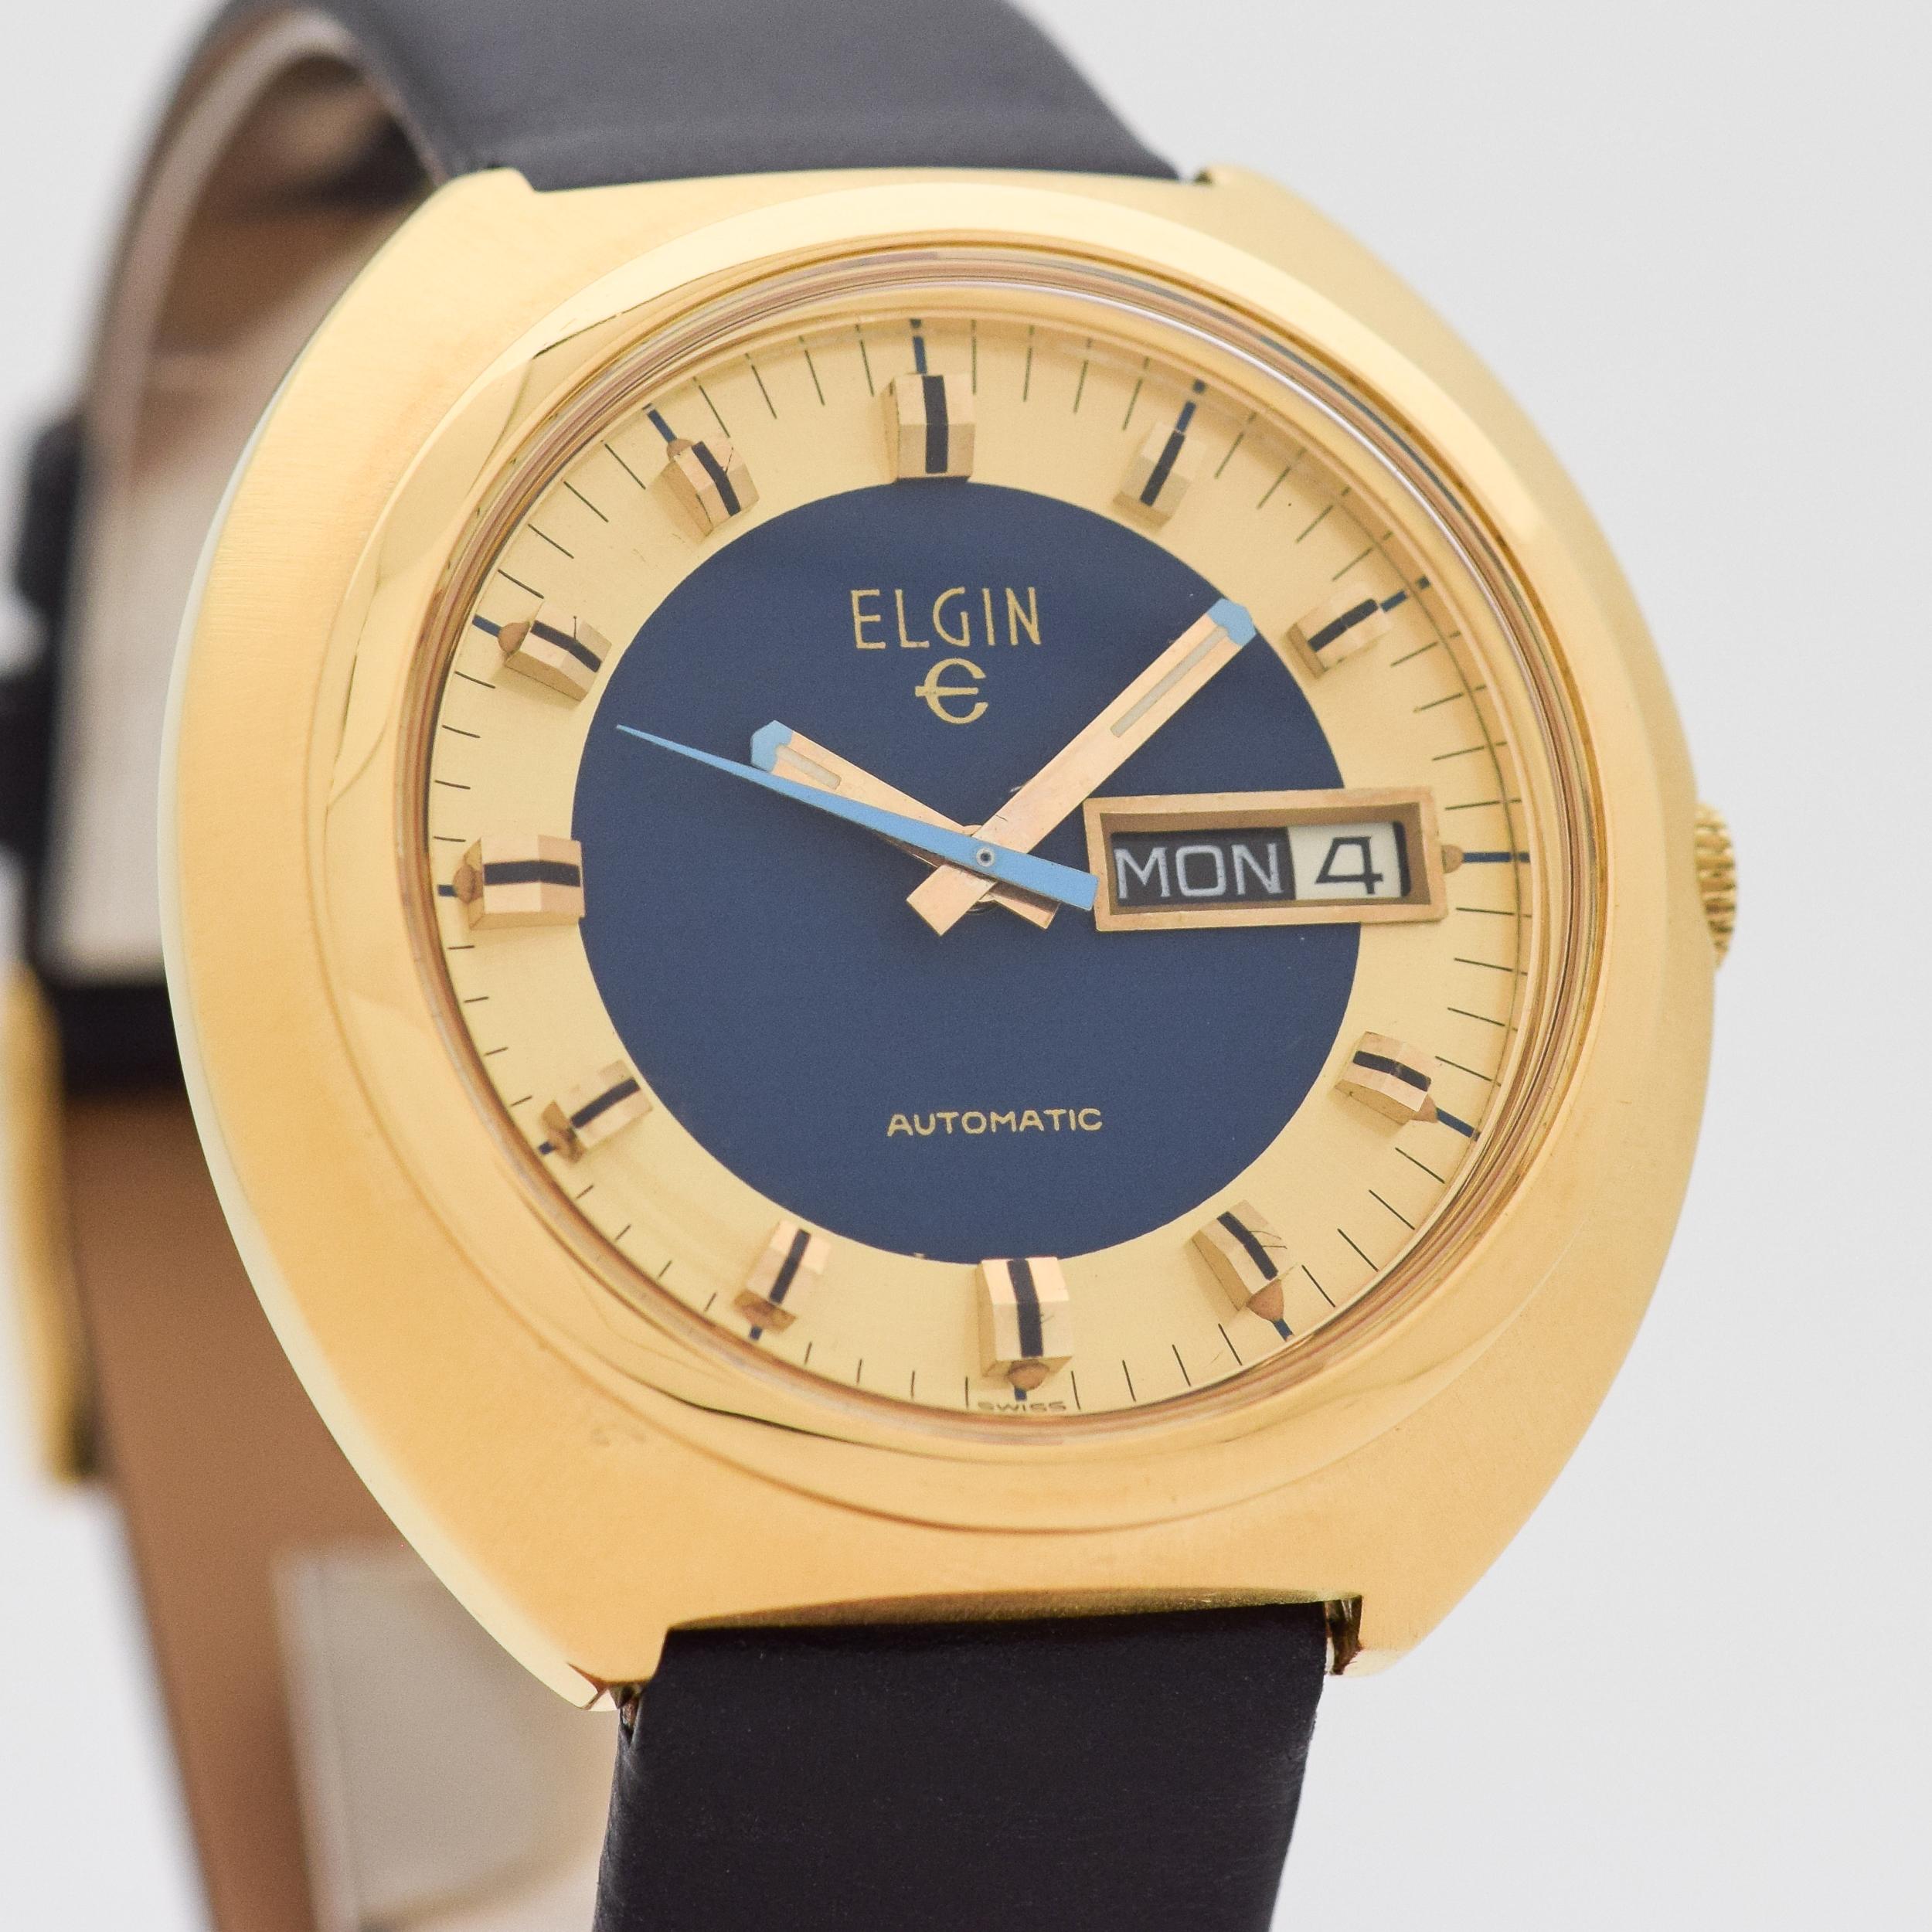 1960's Vintage Elgin Automatic Day - Date Base Metal with Stainless Steel Case Back with Original Two Tone Blue and Gold Dial with Applied Angled Raised Square Markers with Black Inlay. 40mm x 40mm lug to lug (1.57 in. x 1.57 in.) - 17 jewel,